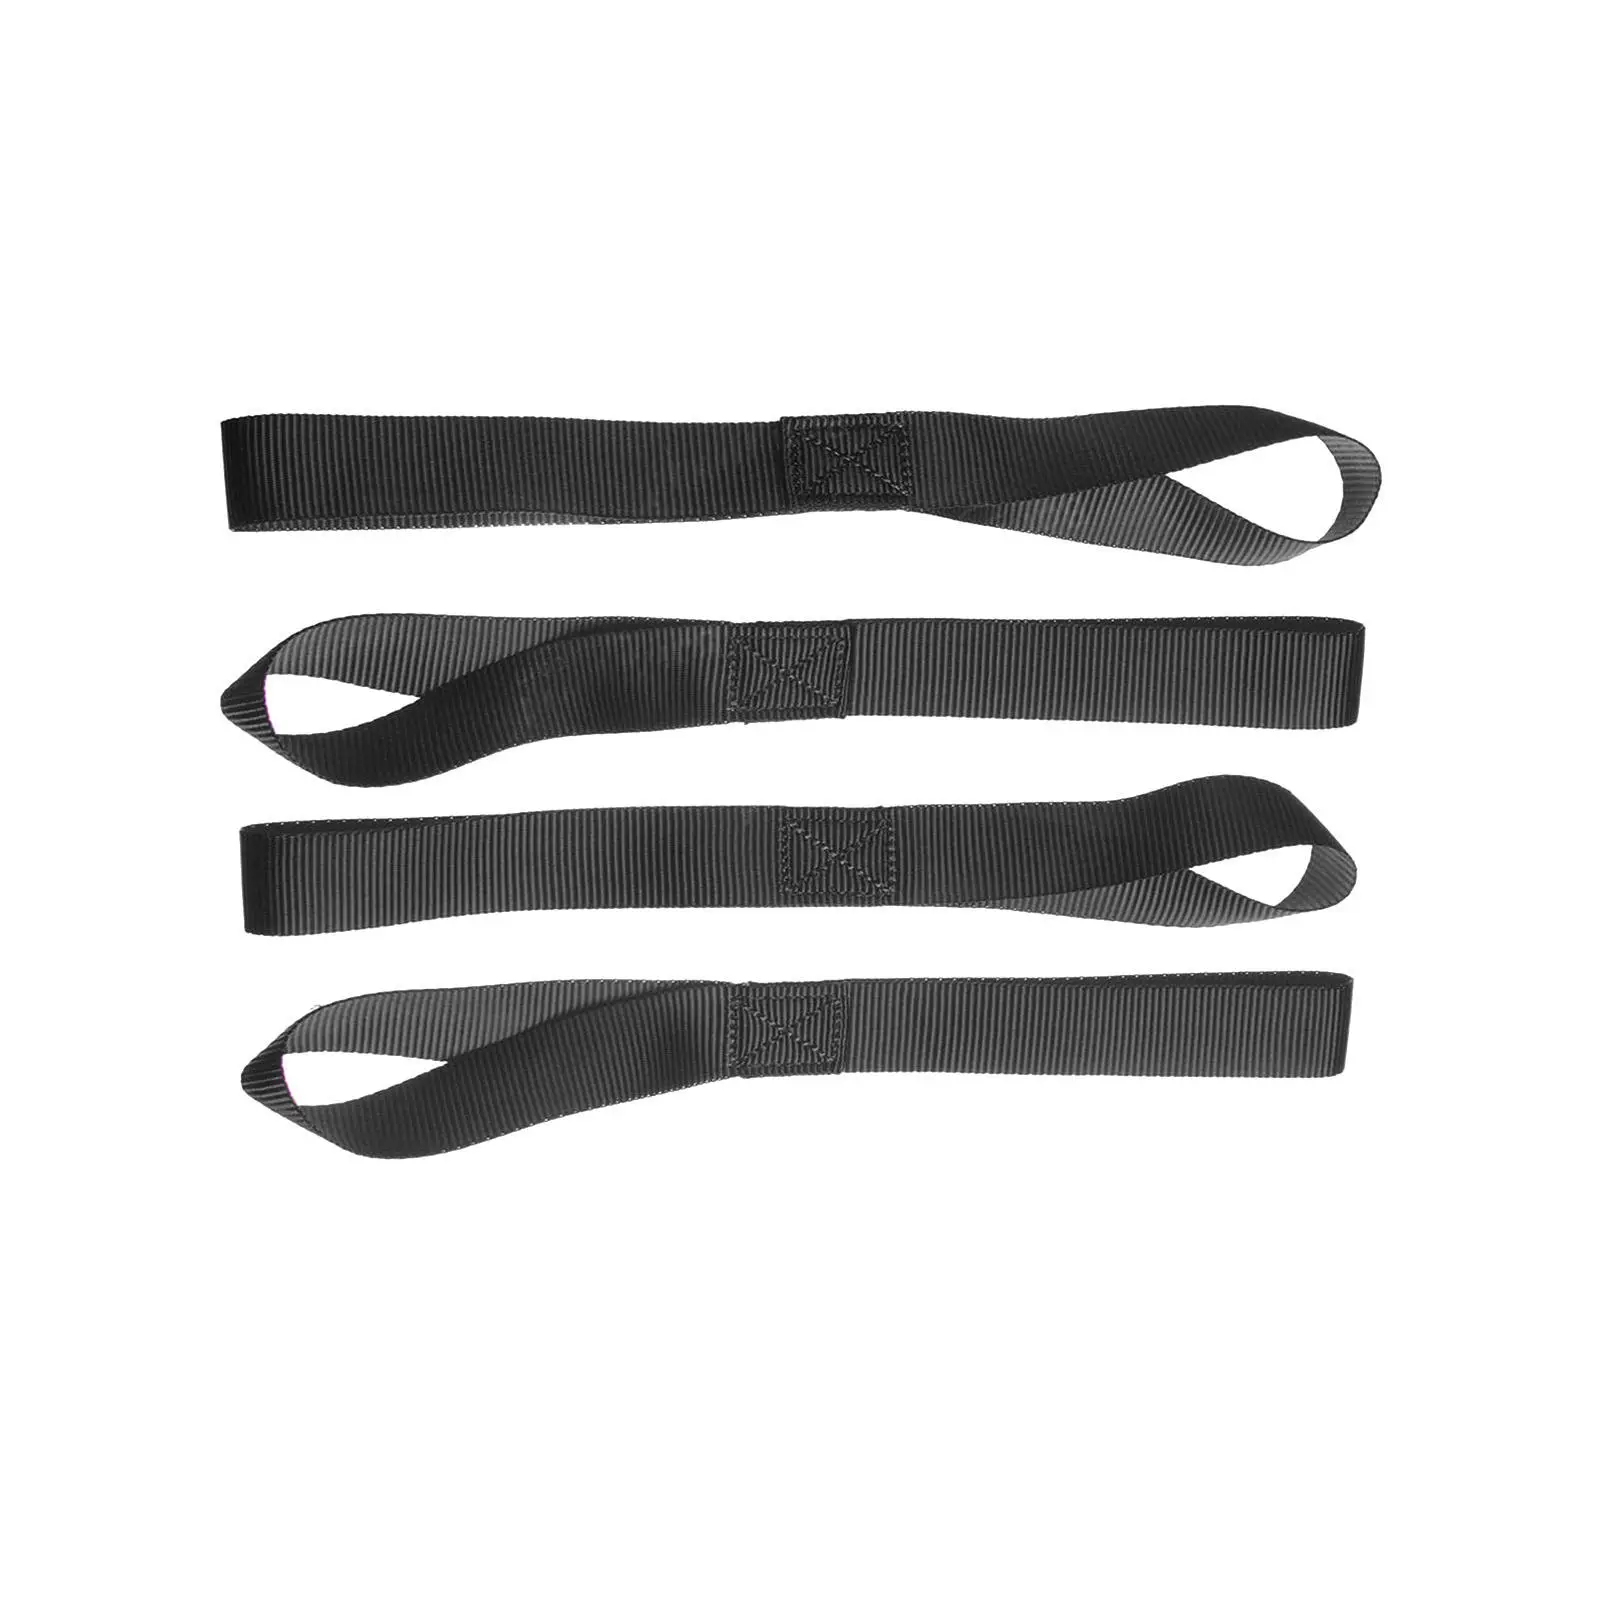 5Pcs Soft Loop for Motorcycle Bikes Nylon for Towing Trailering Reinforced Tie-down Loops Heavy Duty Motorcycle Tie-down Straps